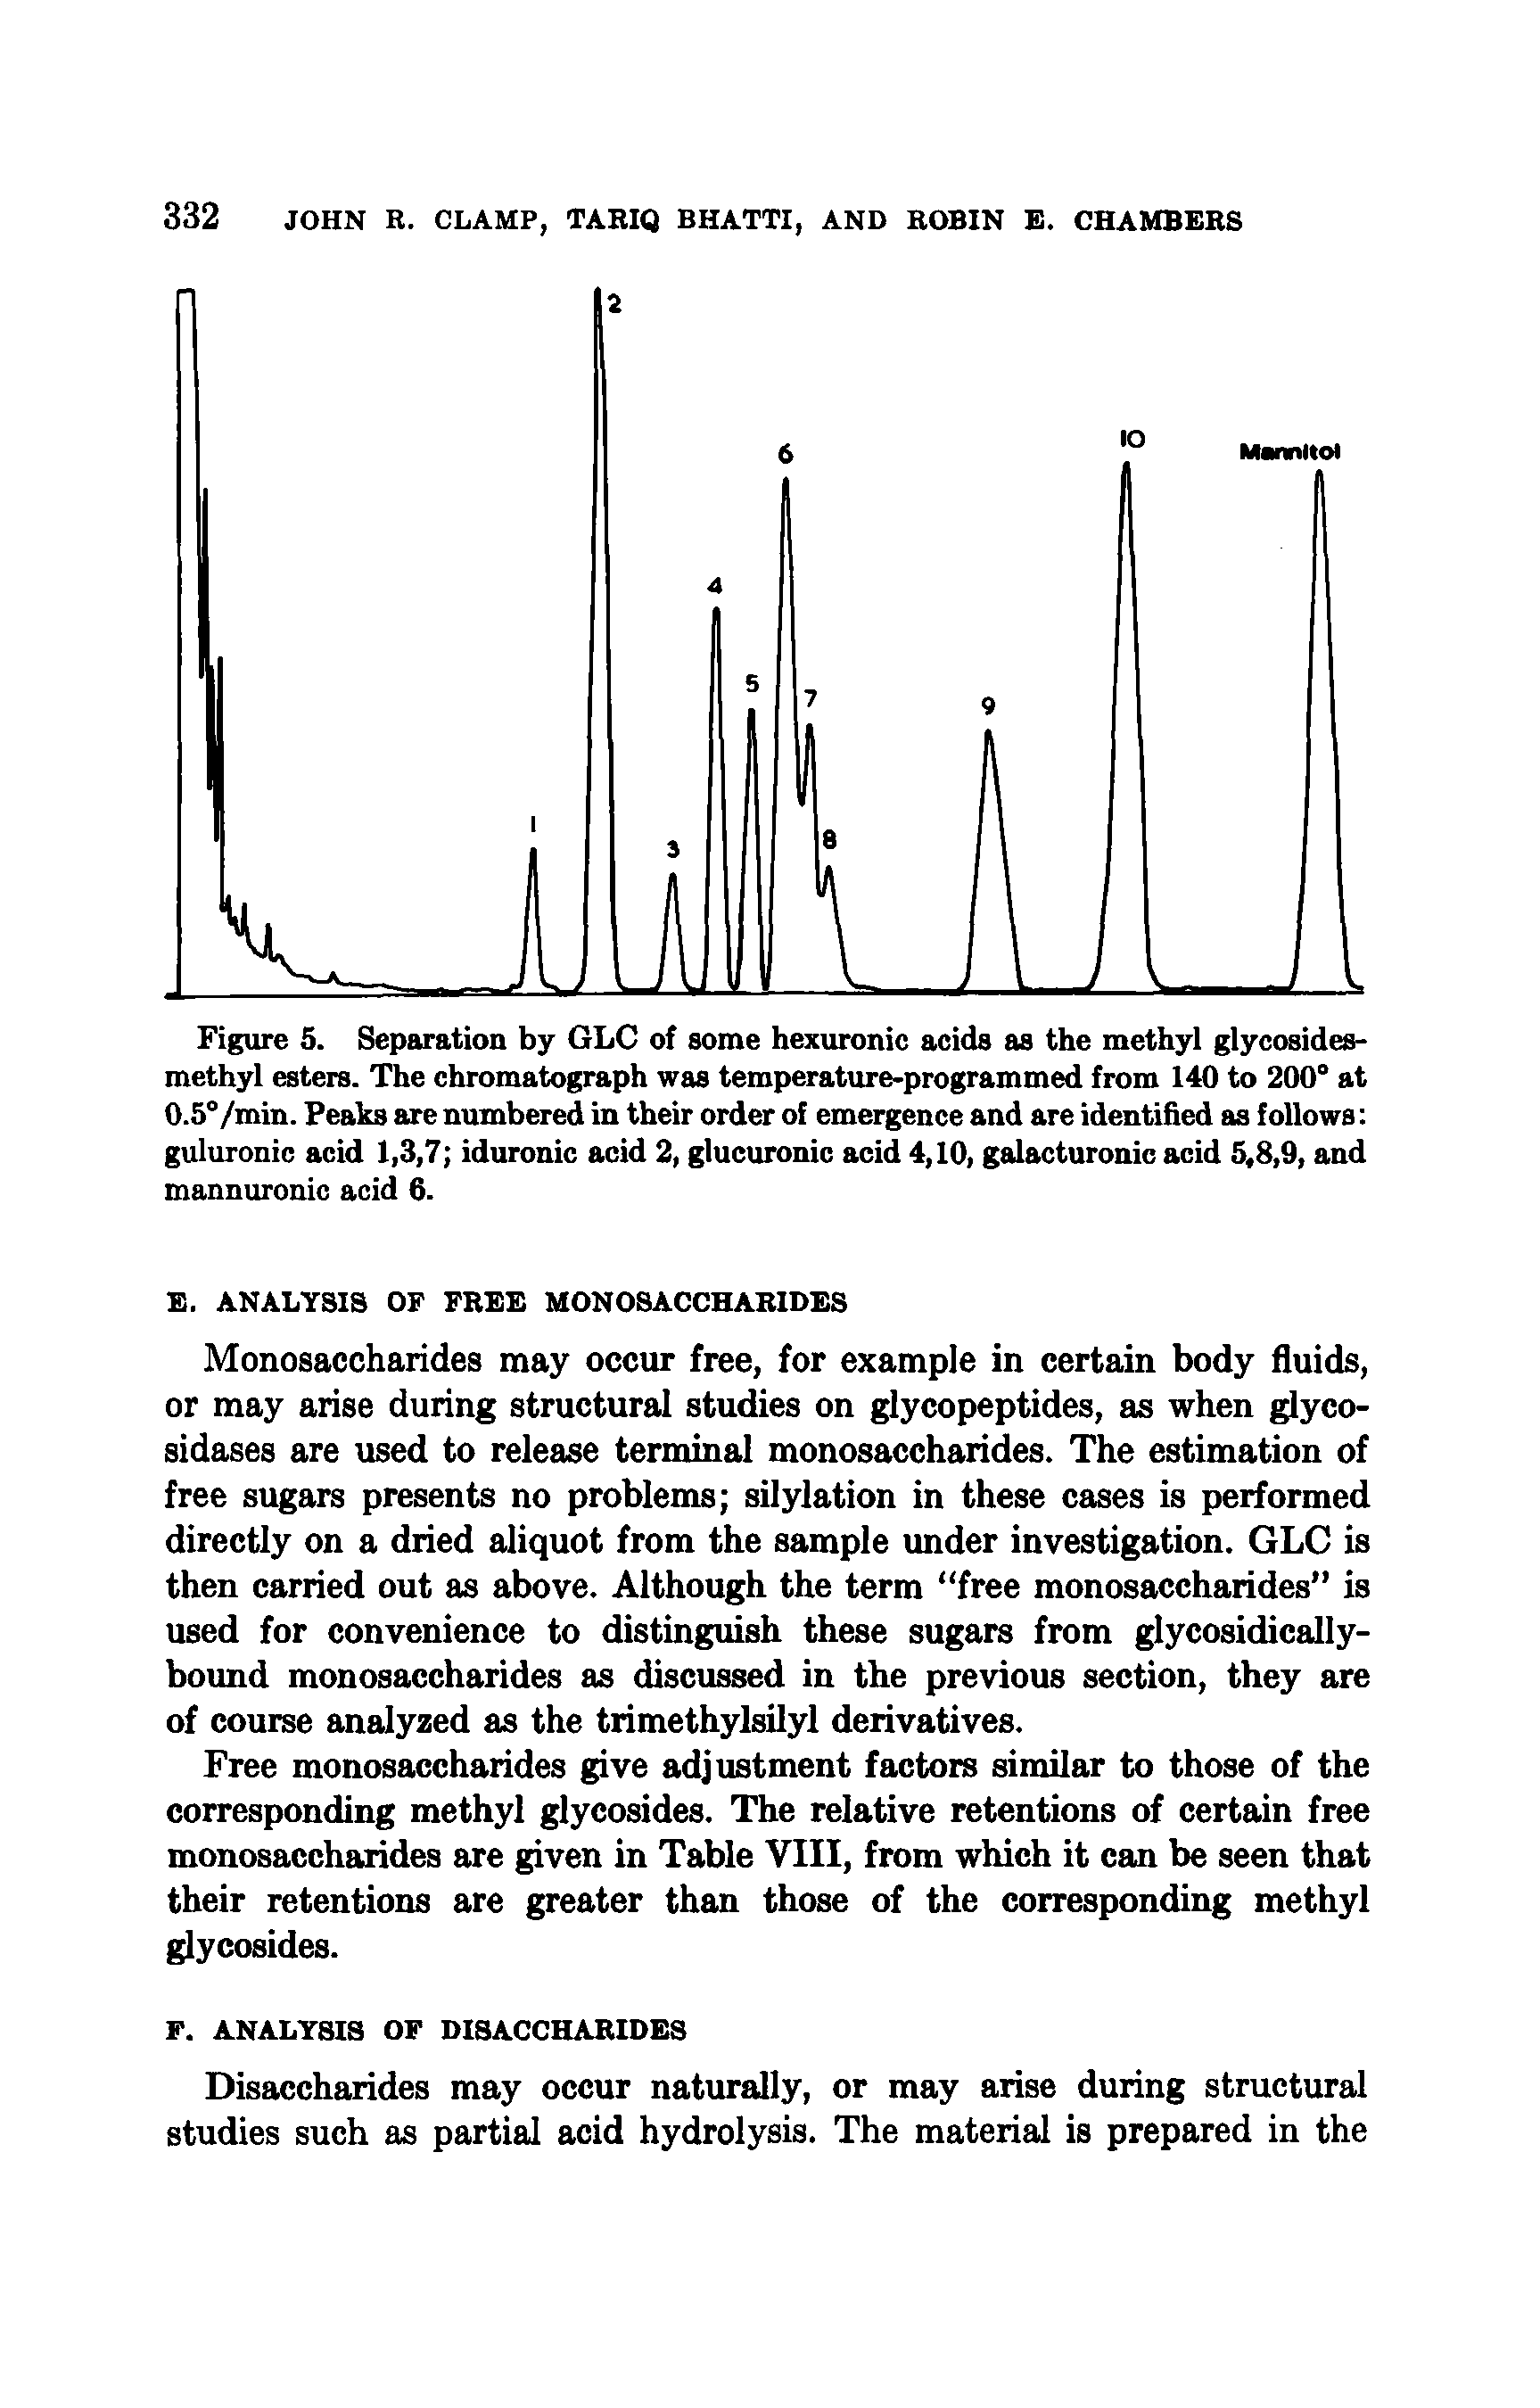 Figure 5. Separation by GLC of some hexuronic acids as the methyl glycosides-methyl esters. The chromatograph was temperature-programmed from 140 to 200° at 0.5°/min. Peaks are numbered in their order of emergence and are identified as follows guluronic acid 1,3,7 iduronic acid 2, glucuronic acid 4,10, galacturonic acid 5,8,9, and mannuronic acid 6.